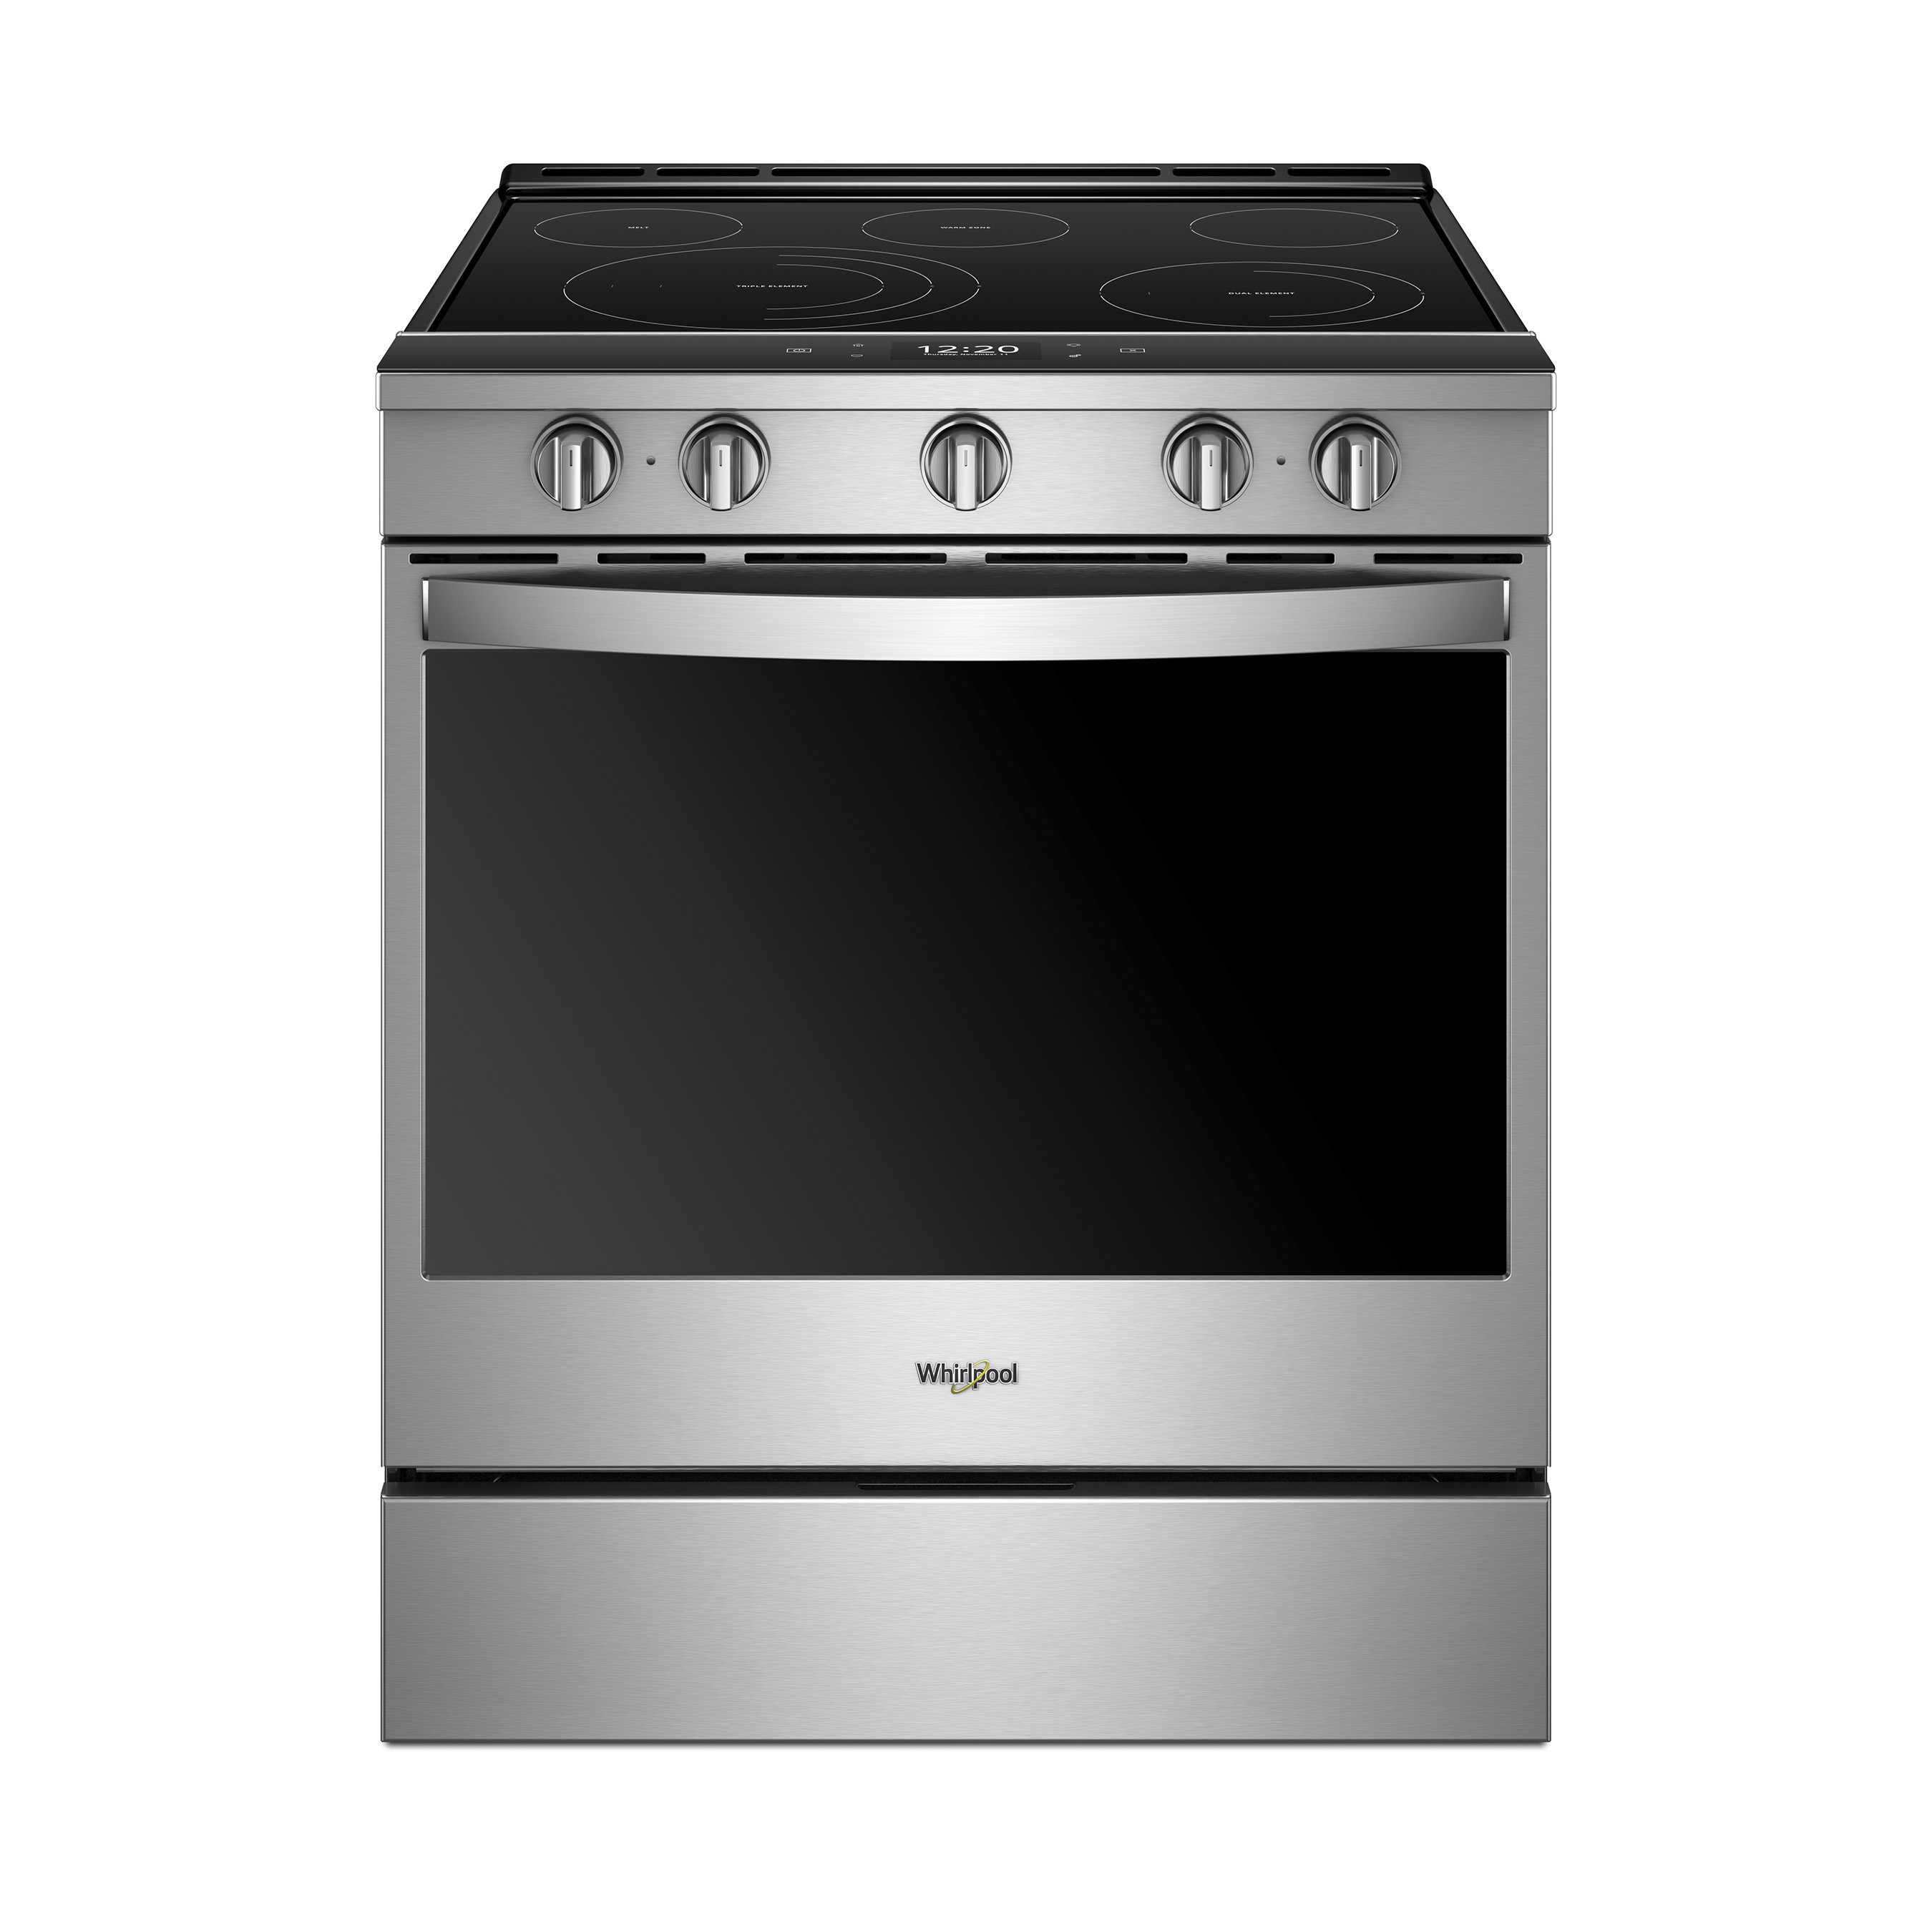 Whirlpool® Smart Kitchen Suite allows remote function via the Whirlpool® mobile app; Scan-to-Cook technology saves time by sending instructions from a scanned UPC code to the appliance.